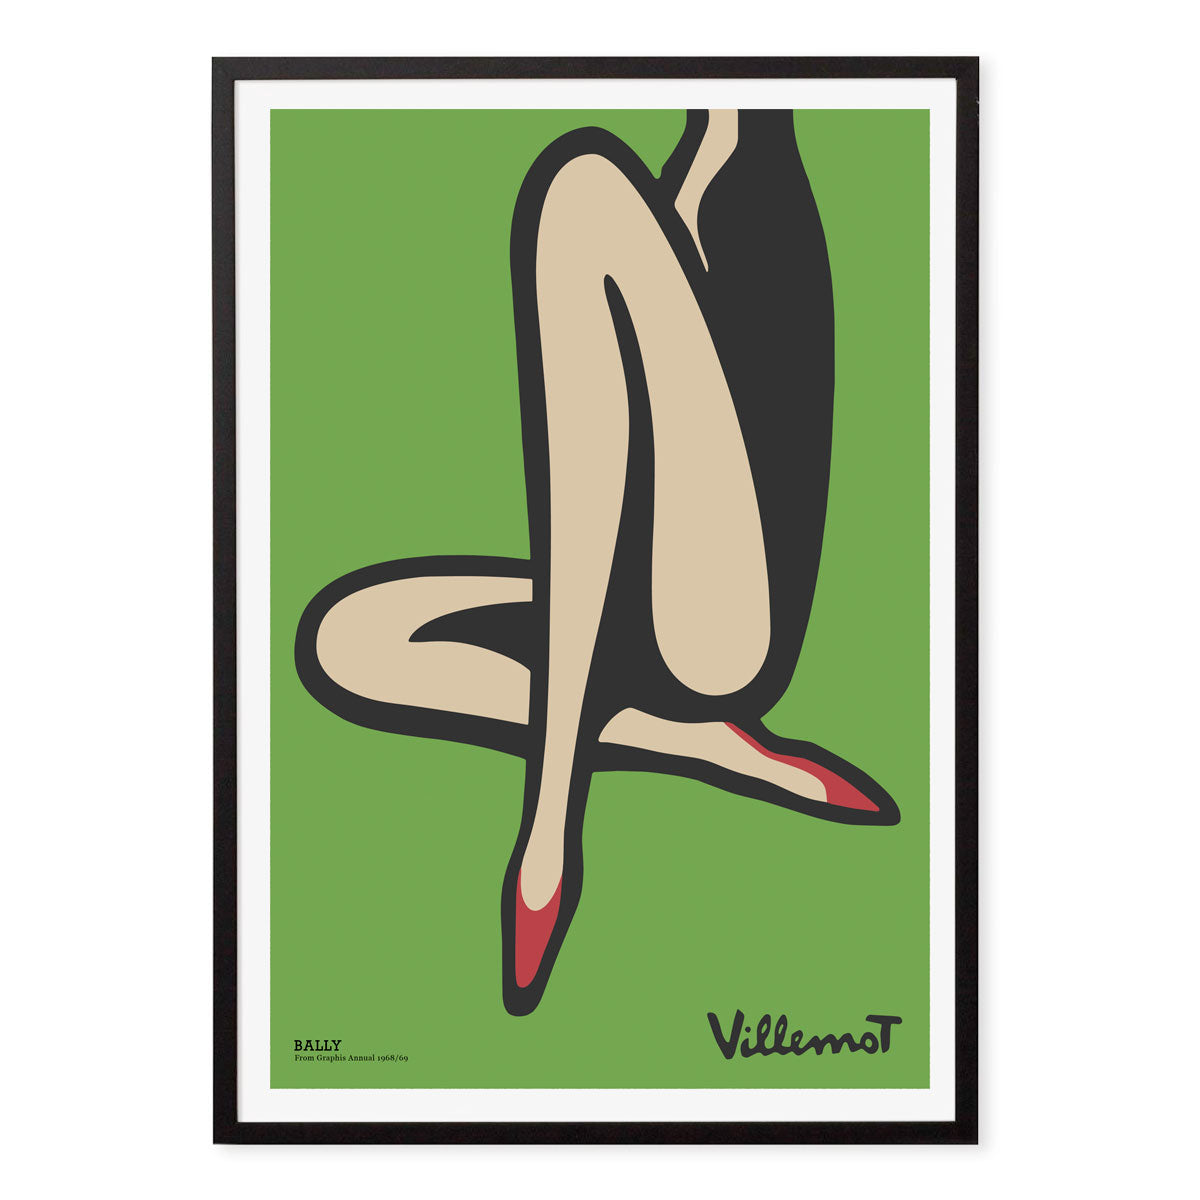 Villemot Bally retro vintage poster print in green with black frame from Places We Luv